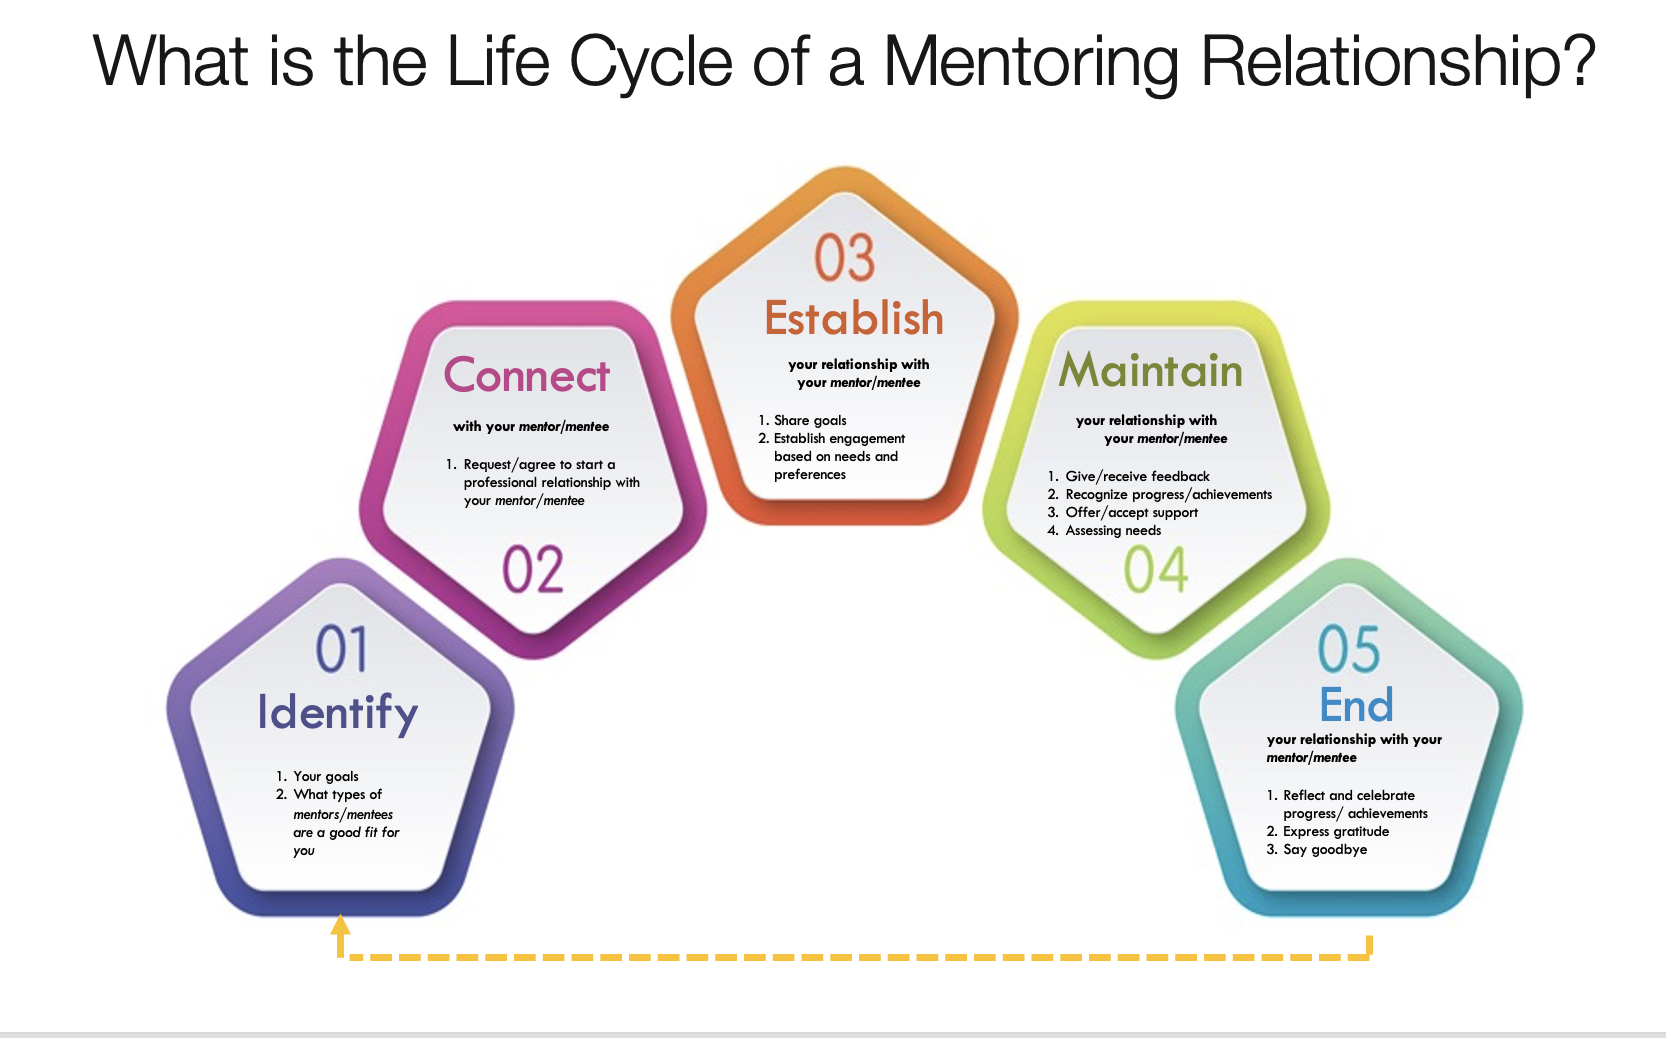 Image of a 5 stage cycle, illustrating each stage in a mentoring relationship: Identify, Connect, Establish, Maintain and End.